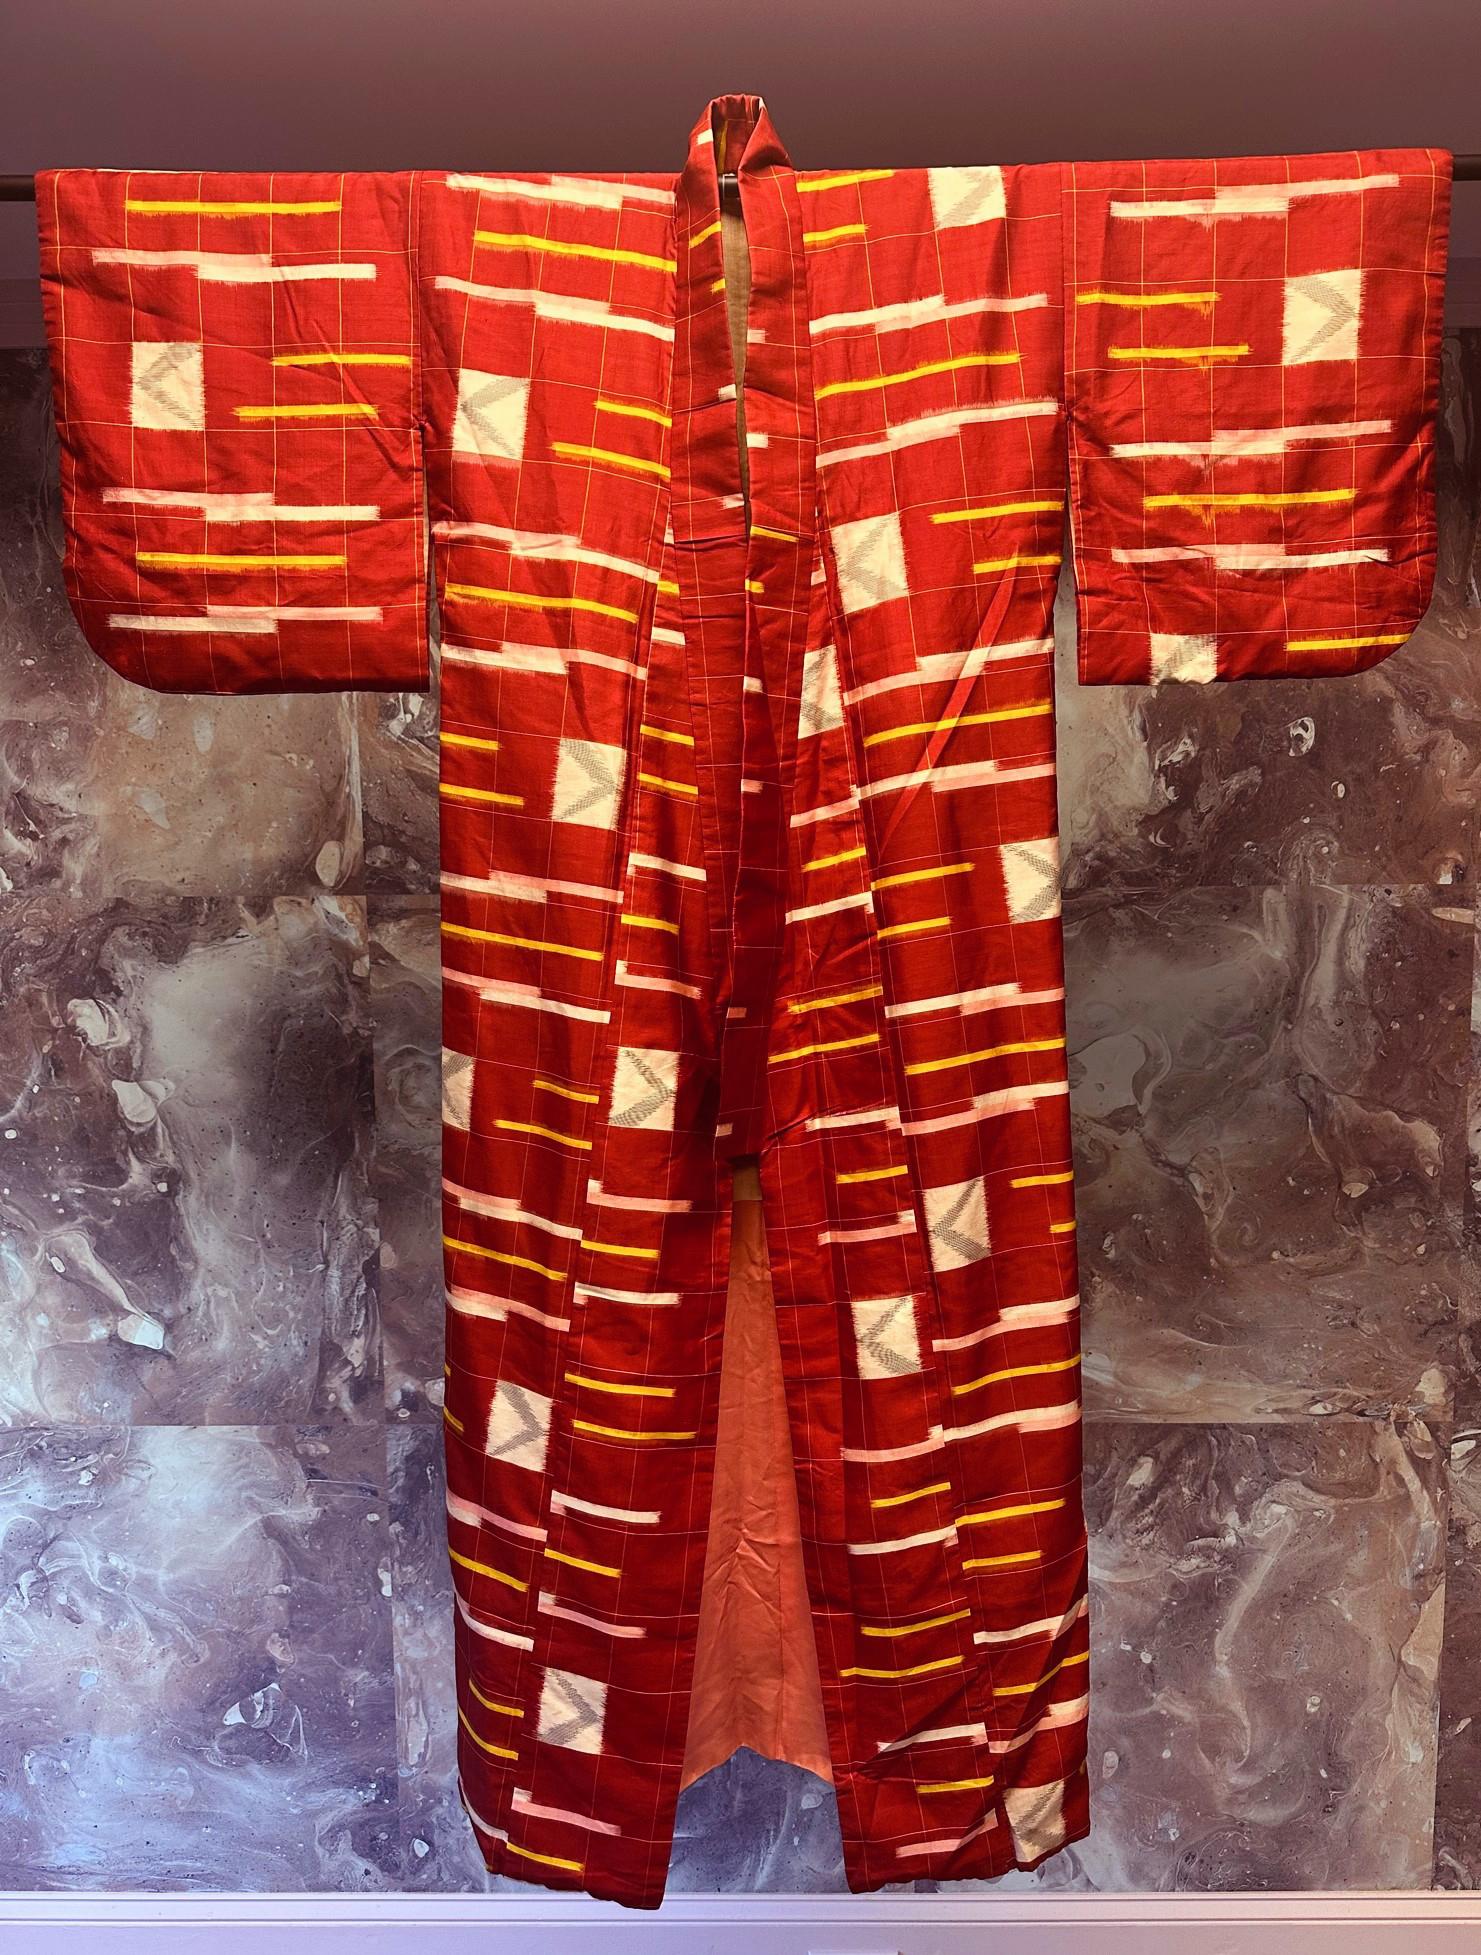 A striking and well preserved Japanese Meisen kimono hand-sewn from woven Ikat Silk circa 1920-40s (Taisho to Showa period). The kosode style kimono (small sleeve), with its Art Deco woven pattern, was a great example of the high end Meisen silk